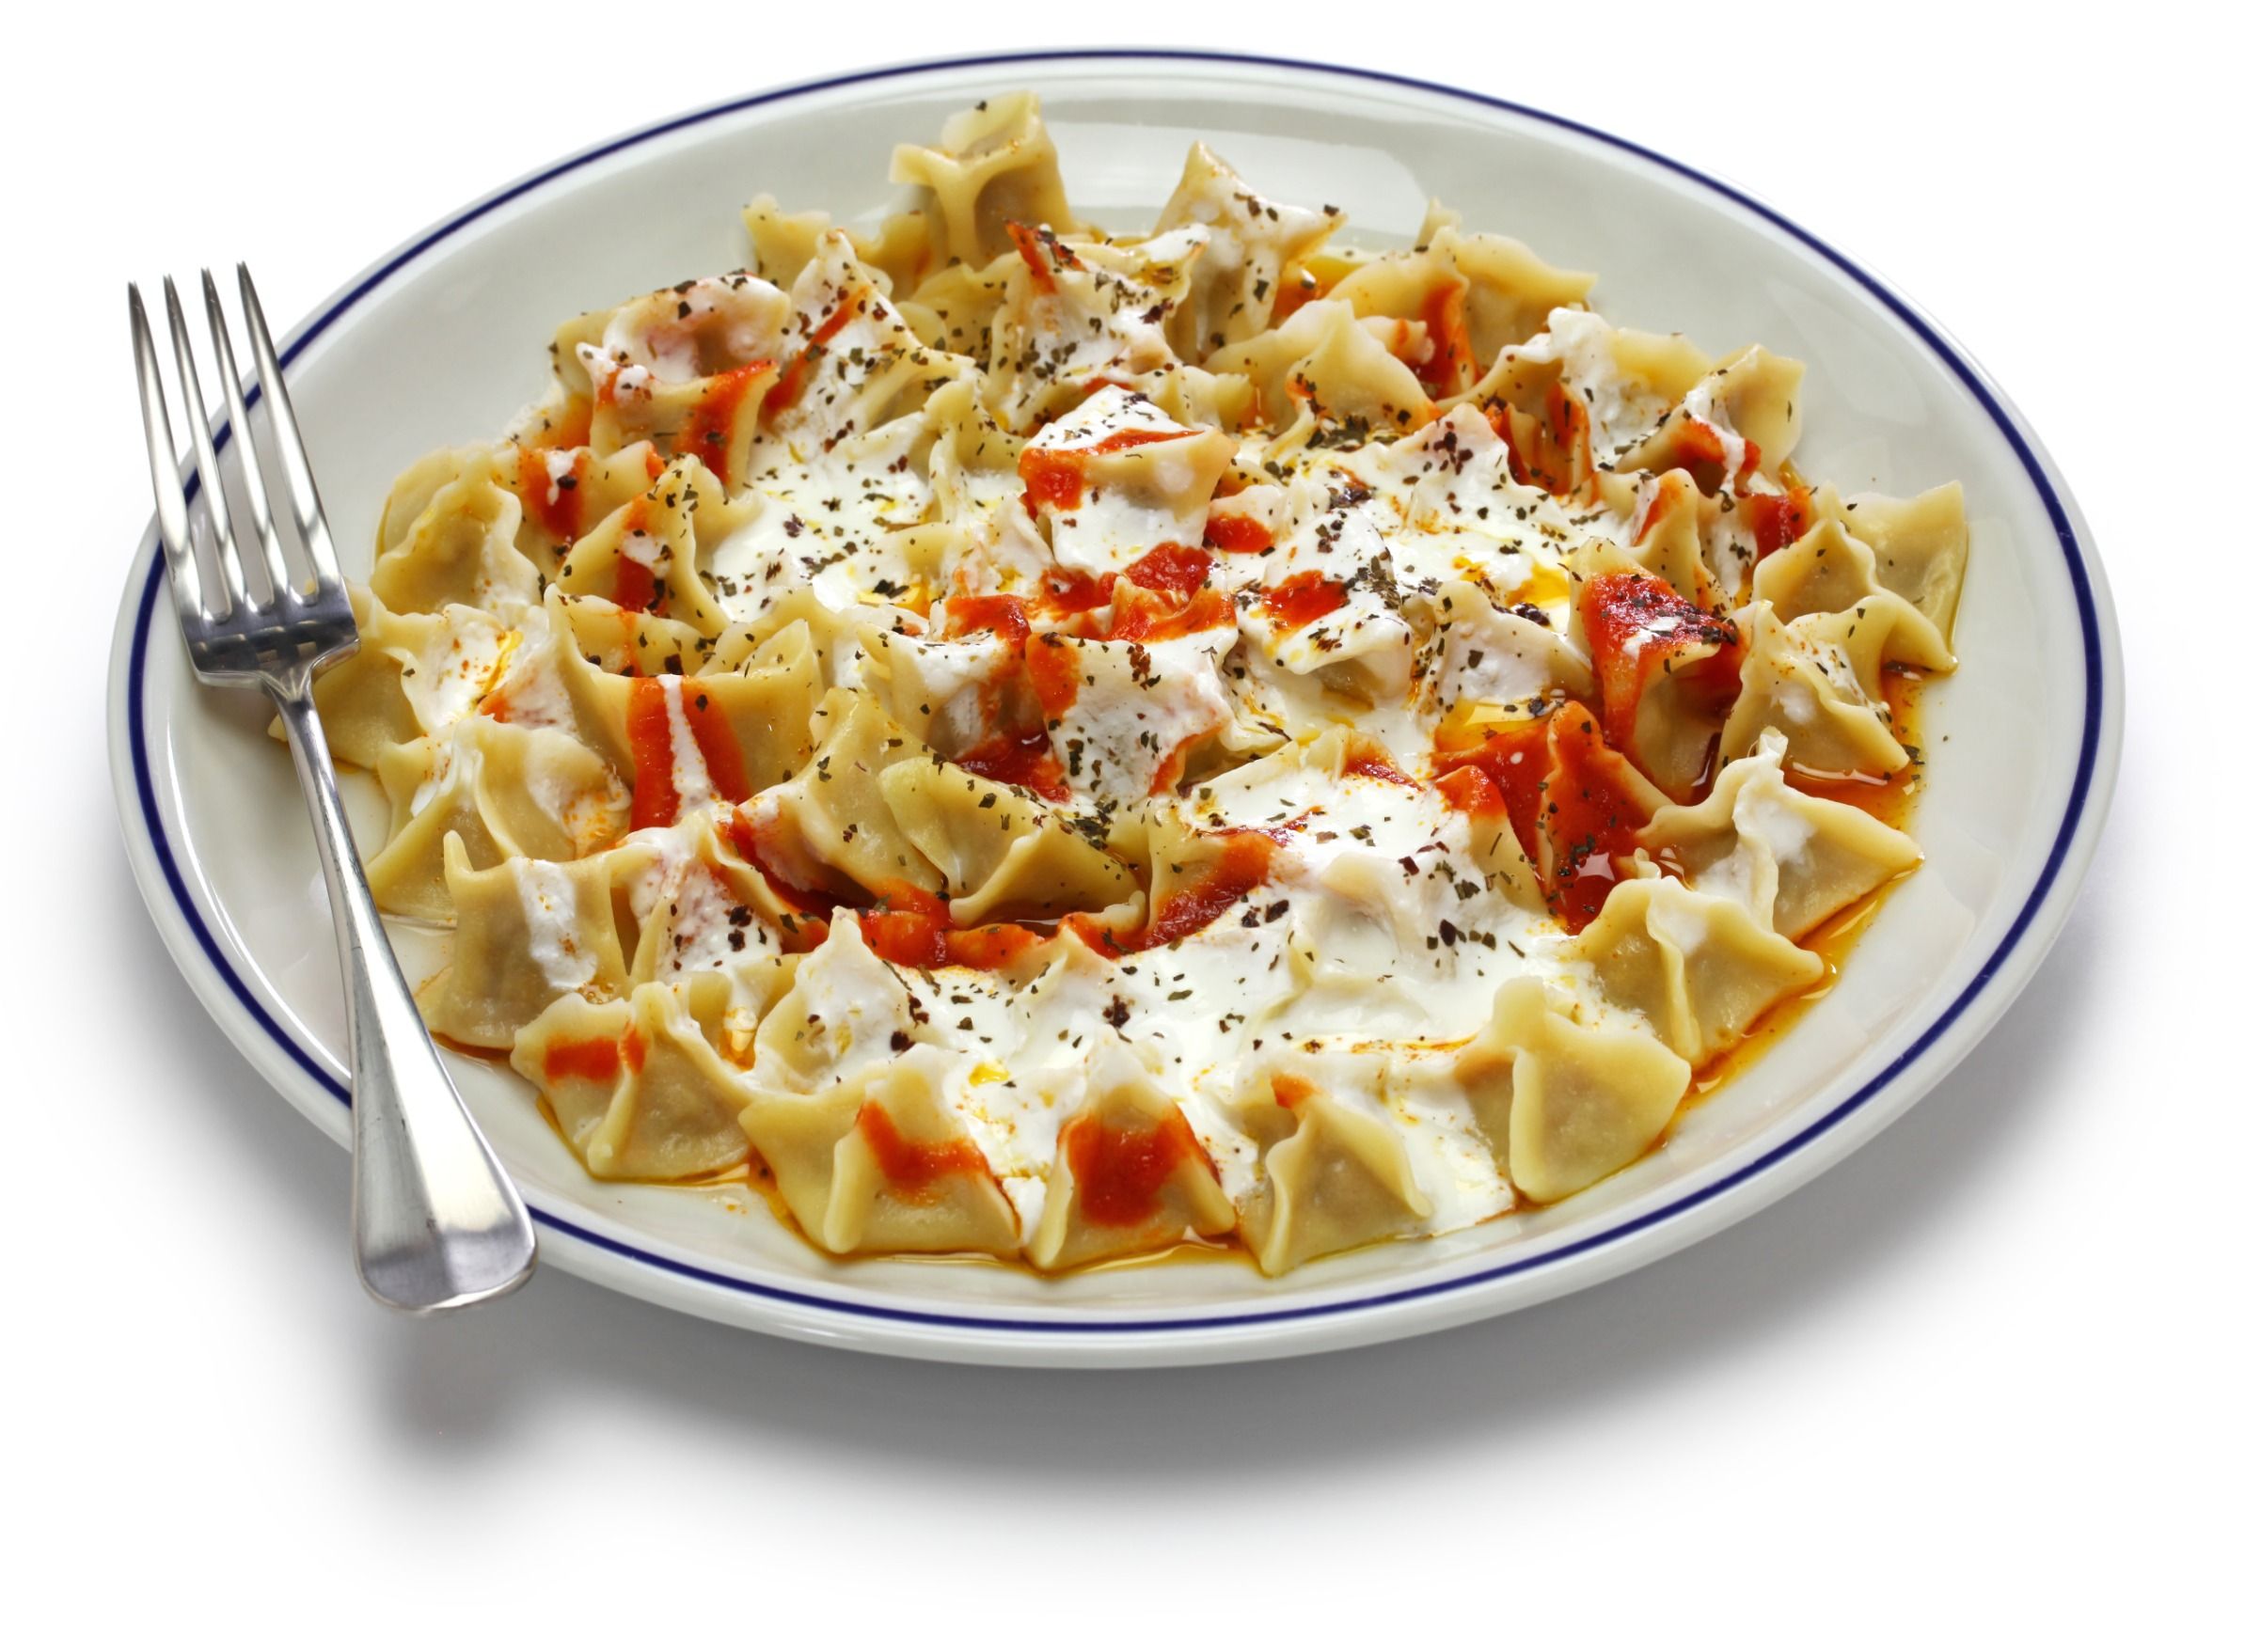 Mantu And Ashak: Appreciating Its History And Keeping Tradition Alive